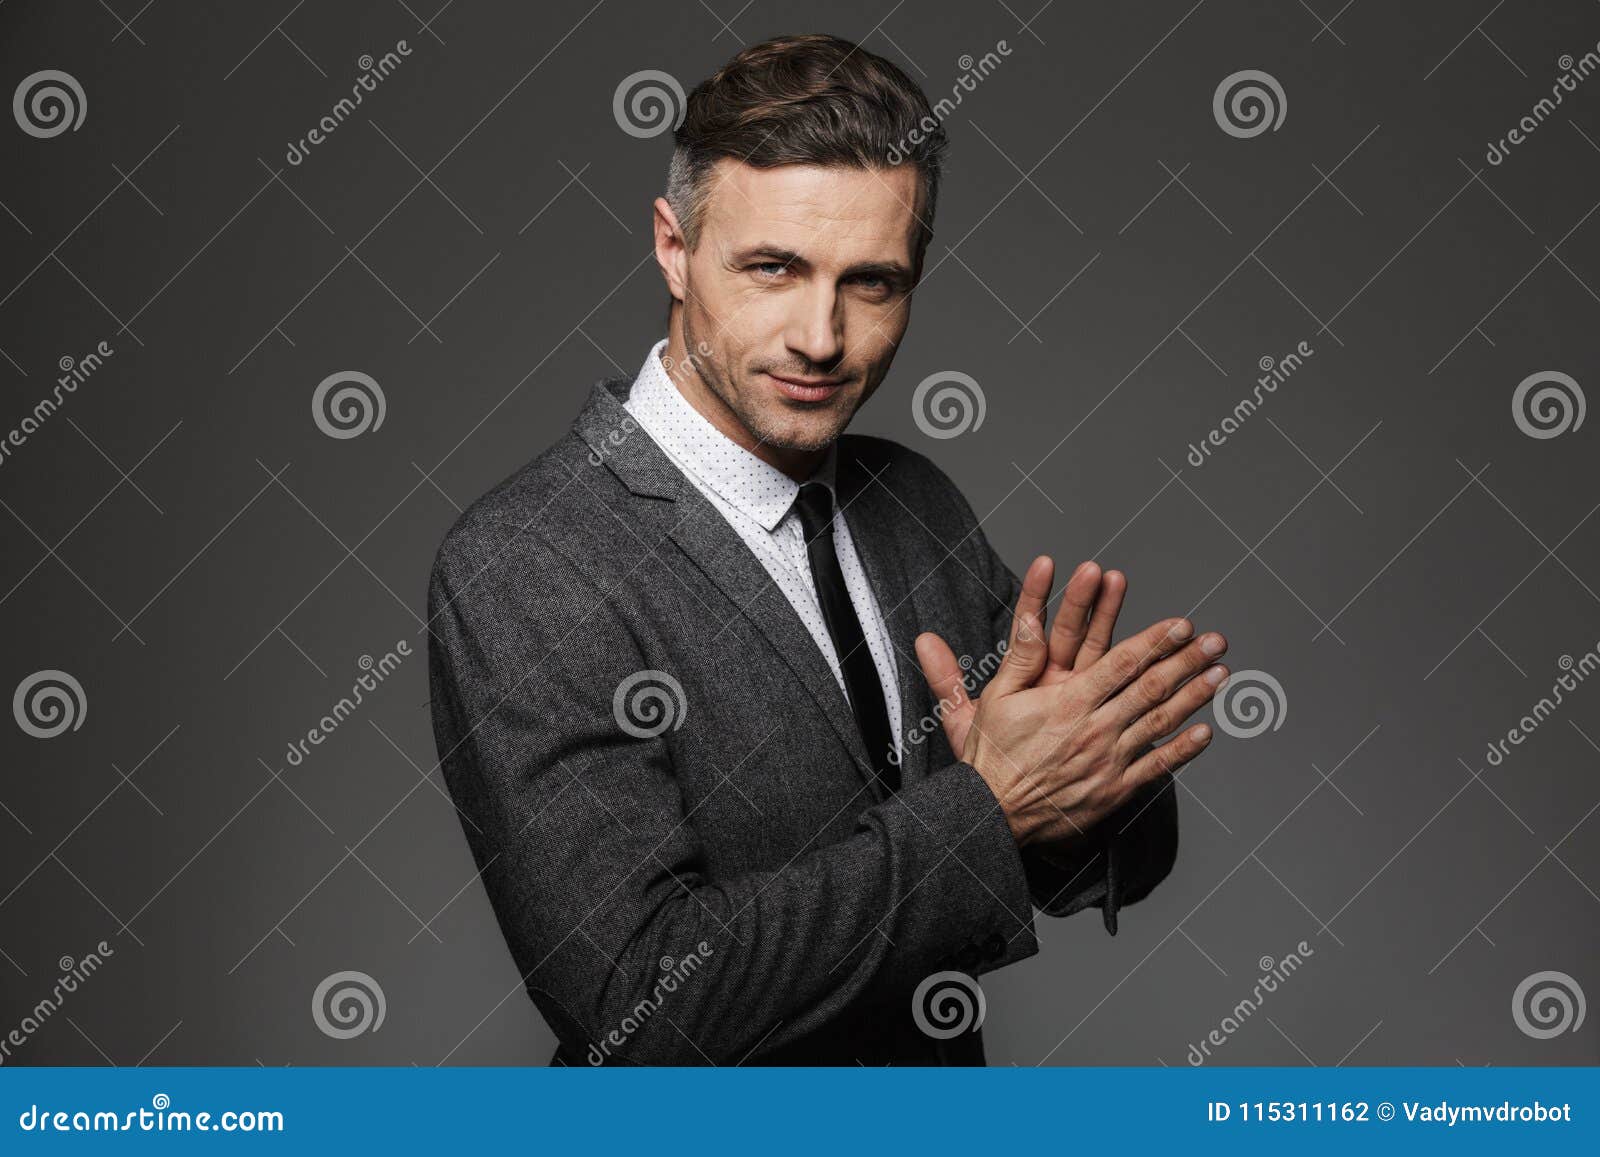 photo of unshaved successful man 30s wearing office suit and black tie smiling on camera holding hands together,  over gr